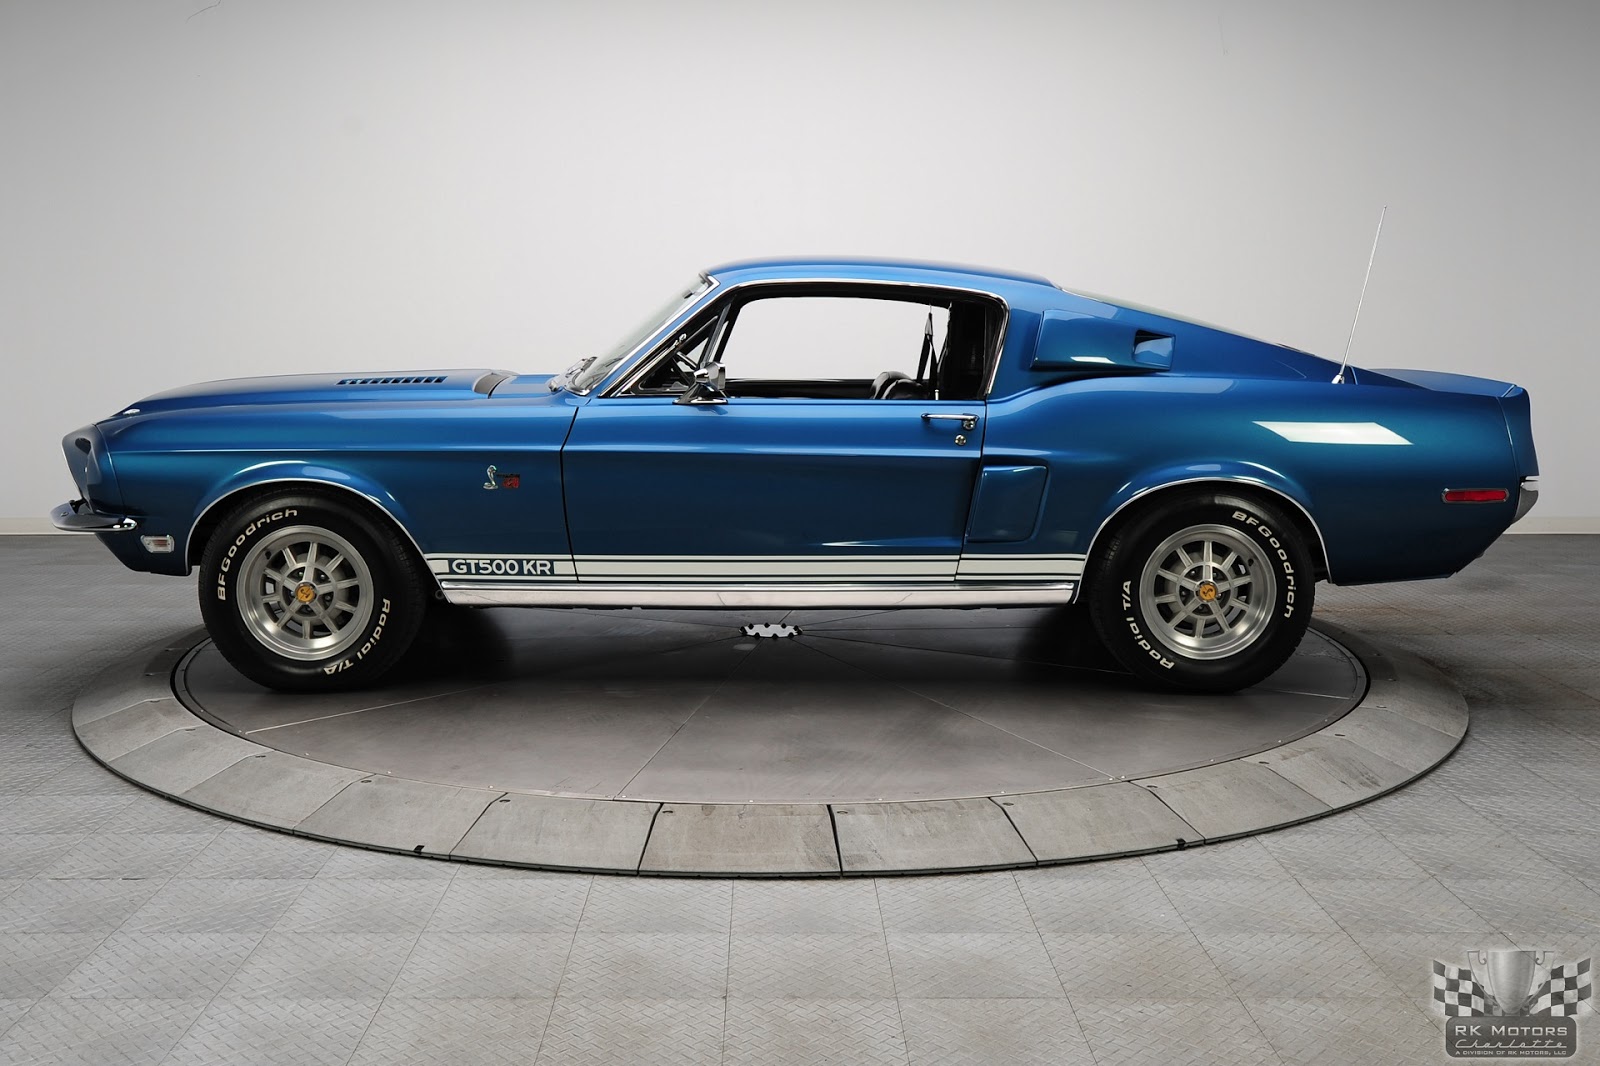 1968 Ford mustang shelby gt500kr coupe #4